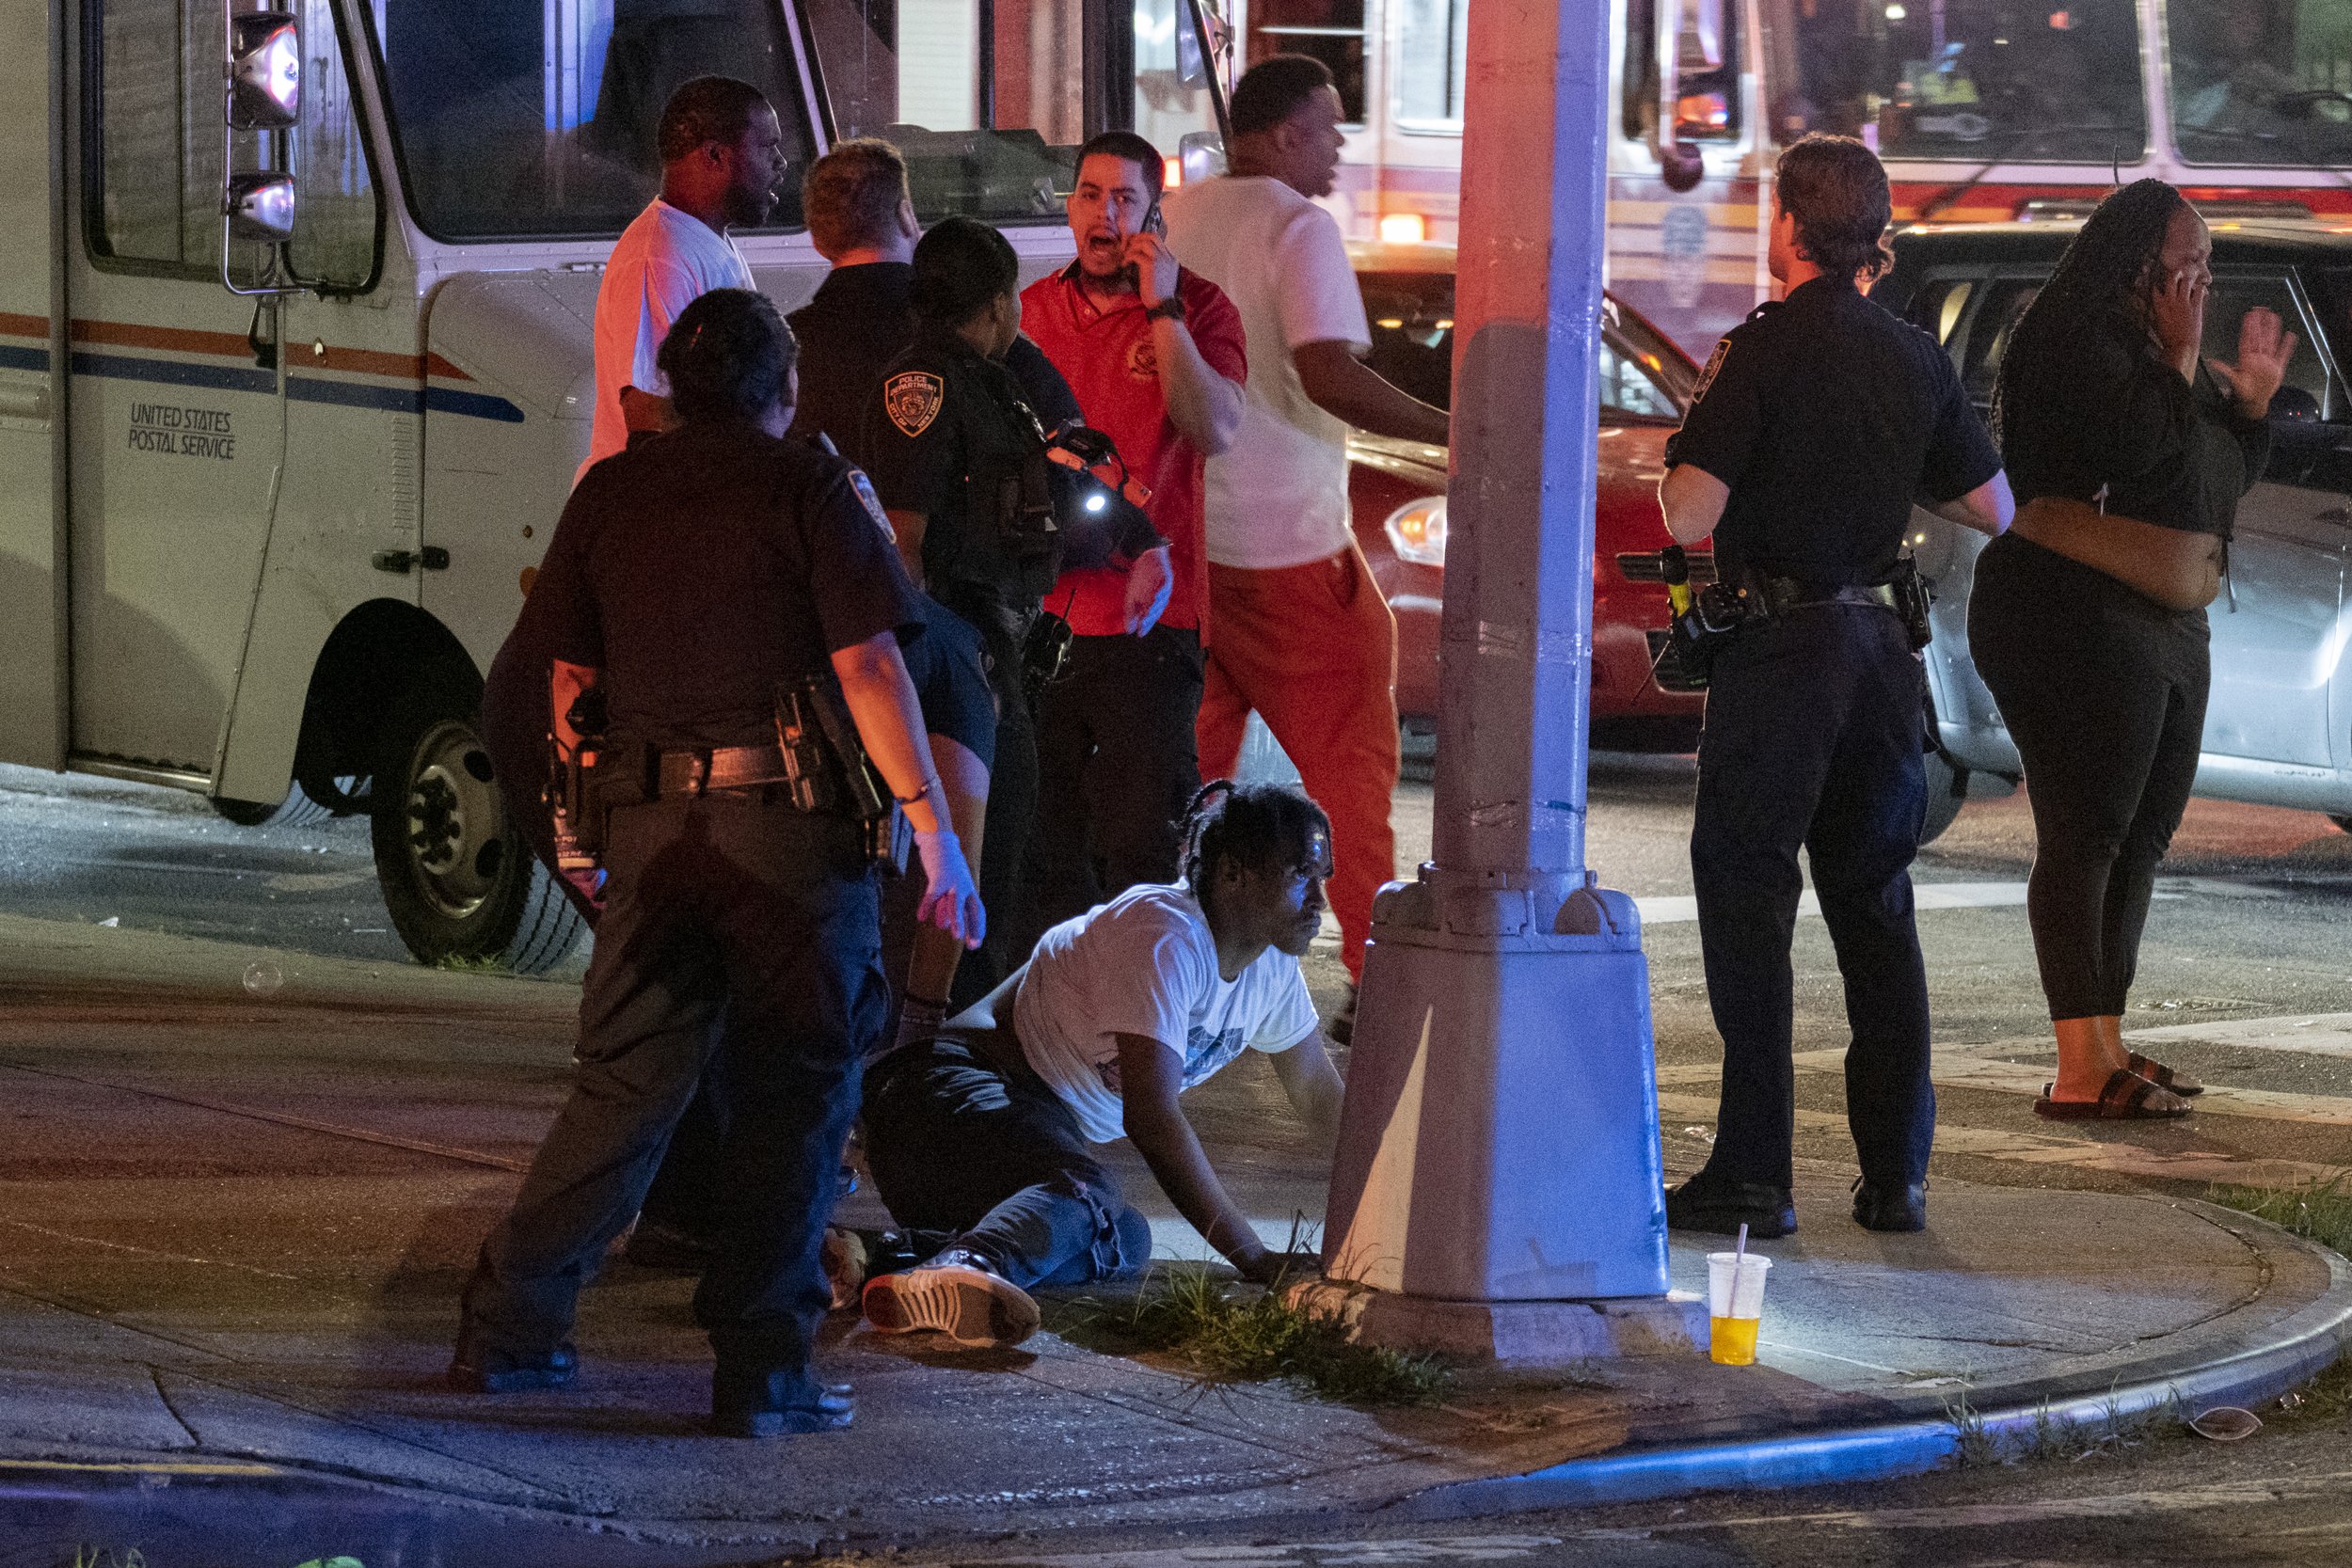  June 20th, 2022 - Manhattan, NY: At approximately 12:40 a.m., police tended to a possible gunshot victim from a massive shoot out between several armed suspects at a Juneteenth cookout that left eight people shot and one, 21-year-old Darius Lee, a s